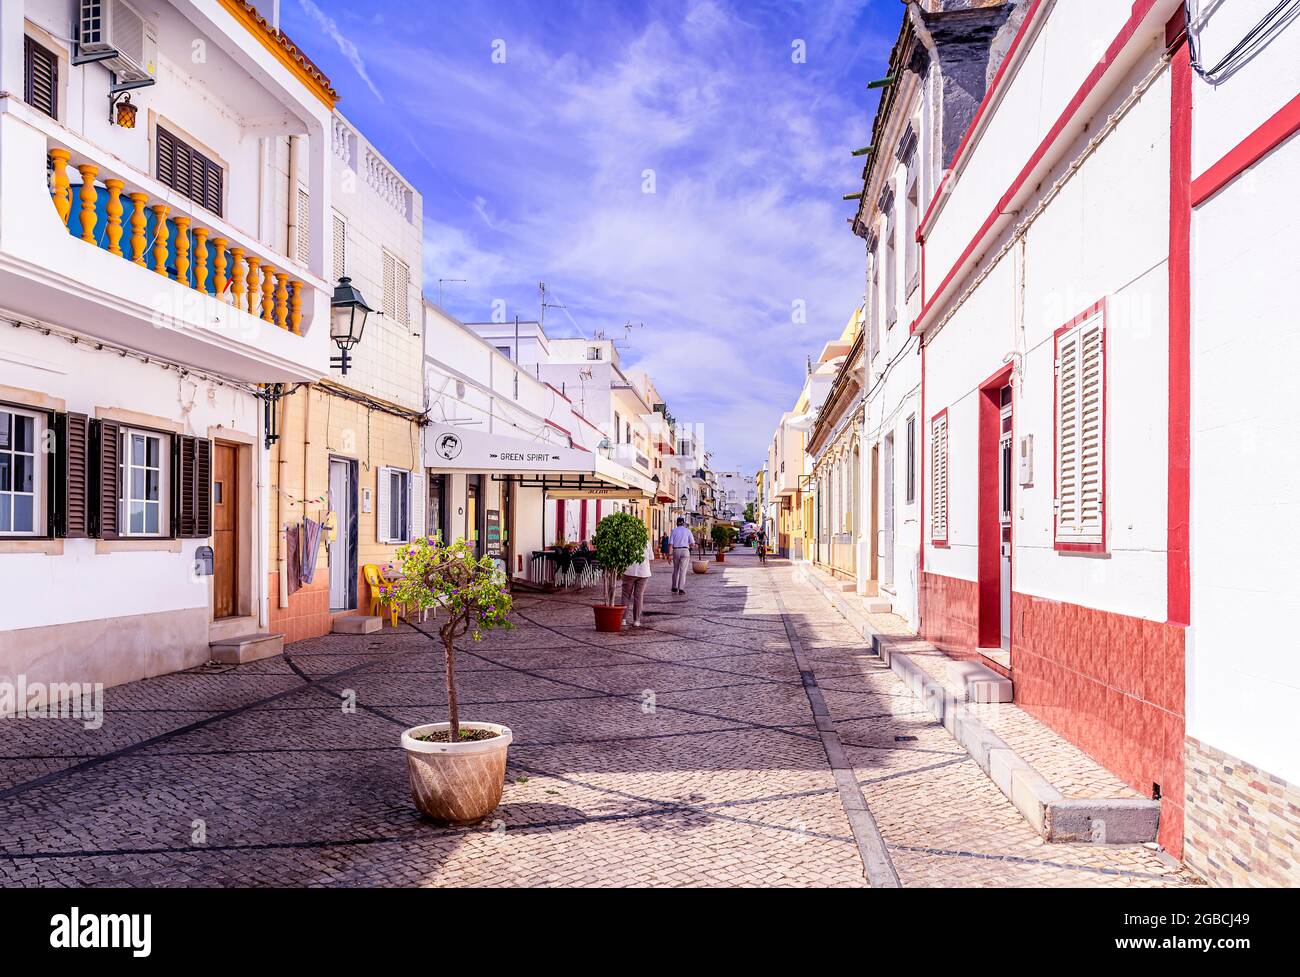 Typical portuguese cobble stone paved street , calcada portuguesa portuguese paving stones. Fuseta East Algarve Portugal Stock Photo